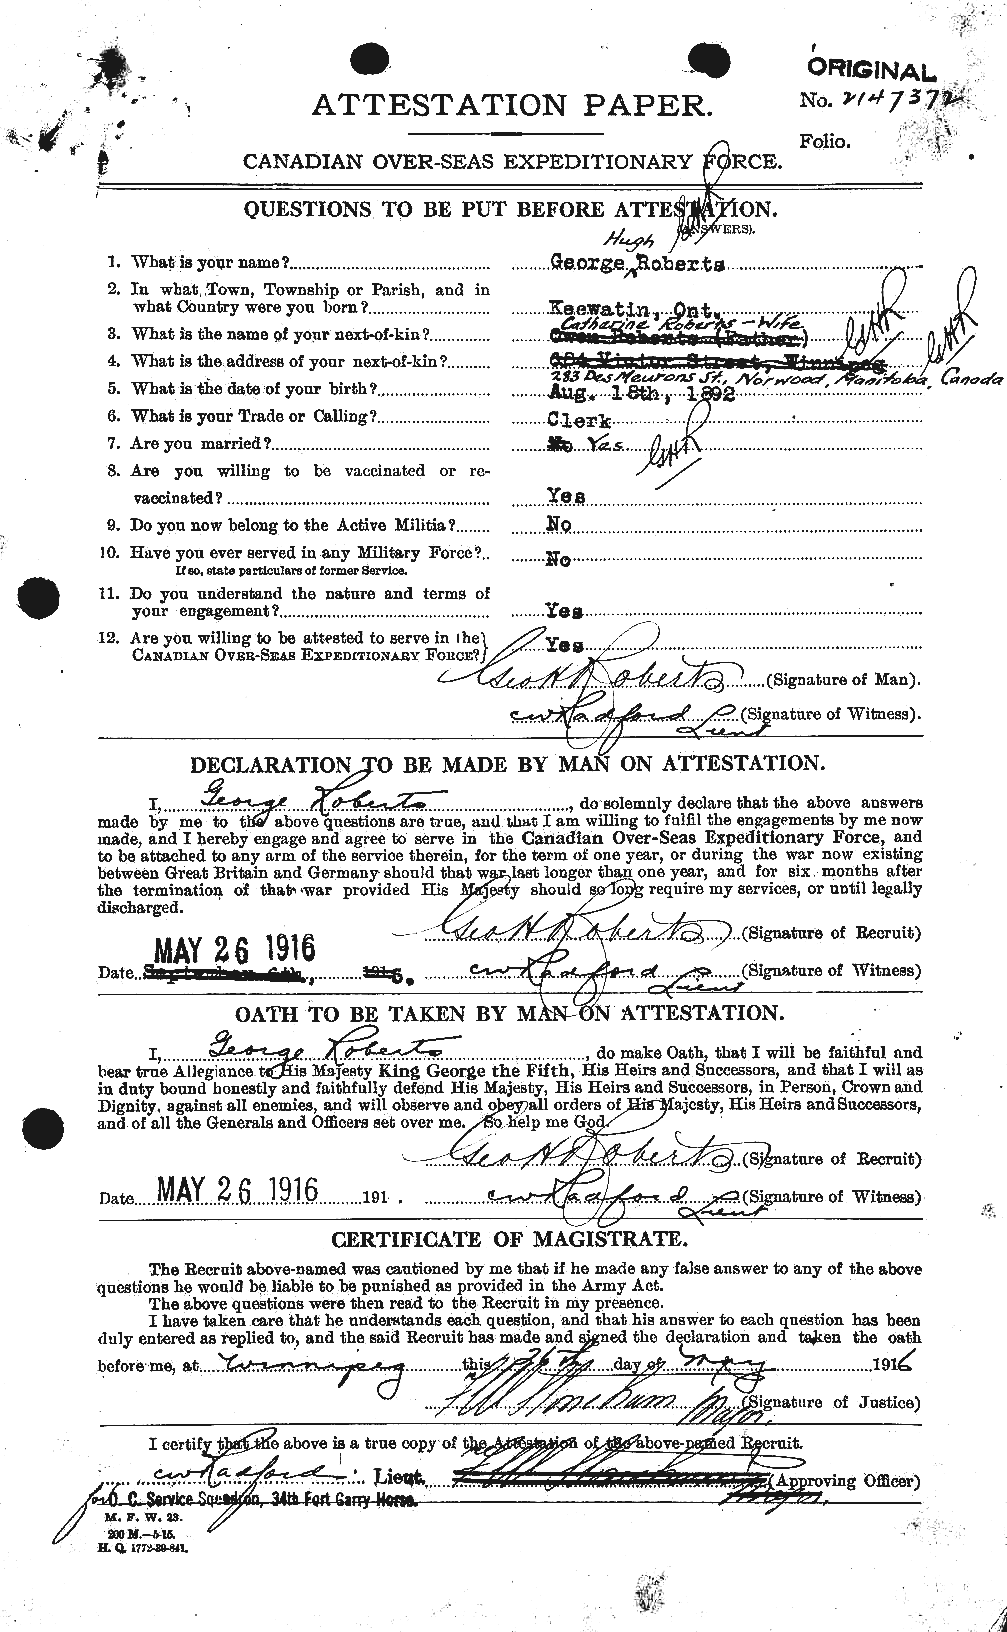 Personnel Records of the First World War - CEF 606928a